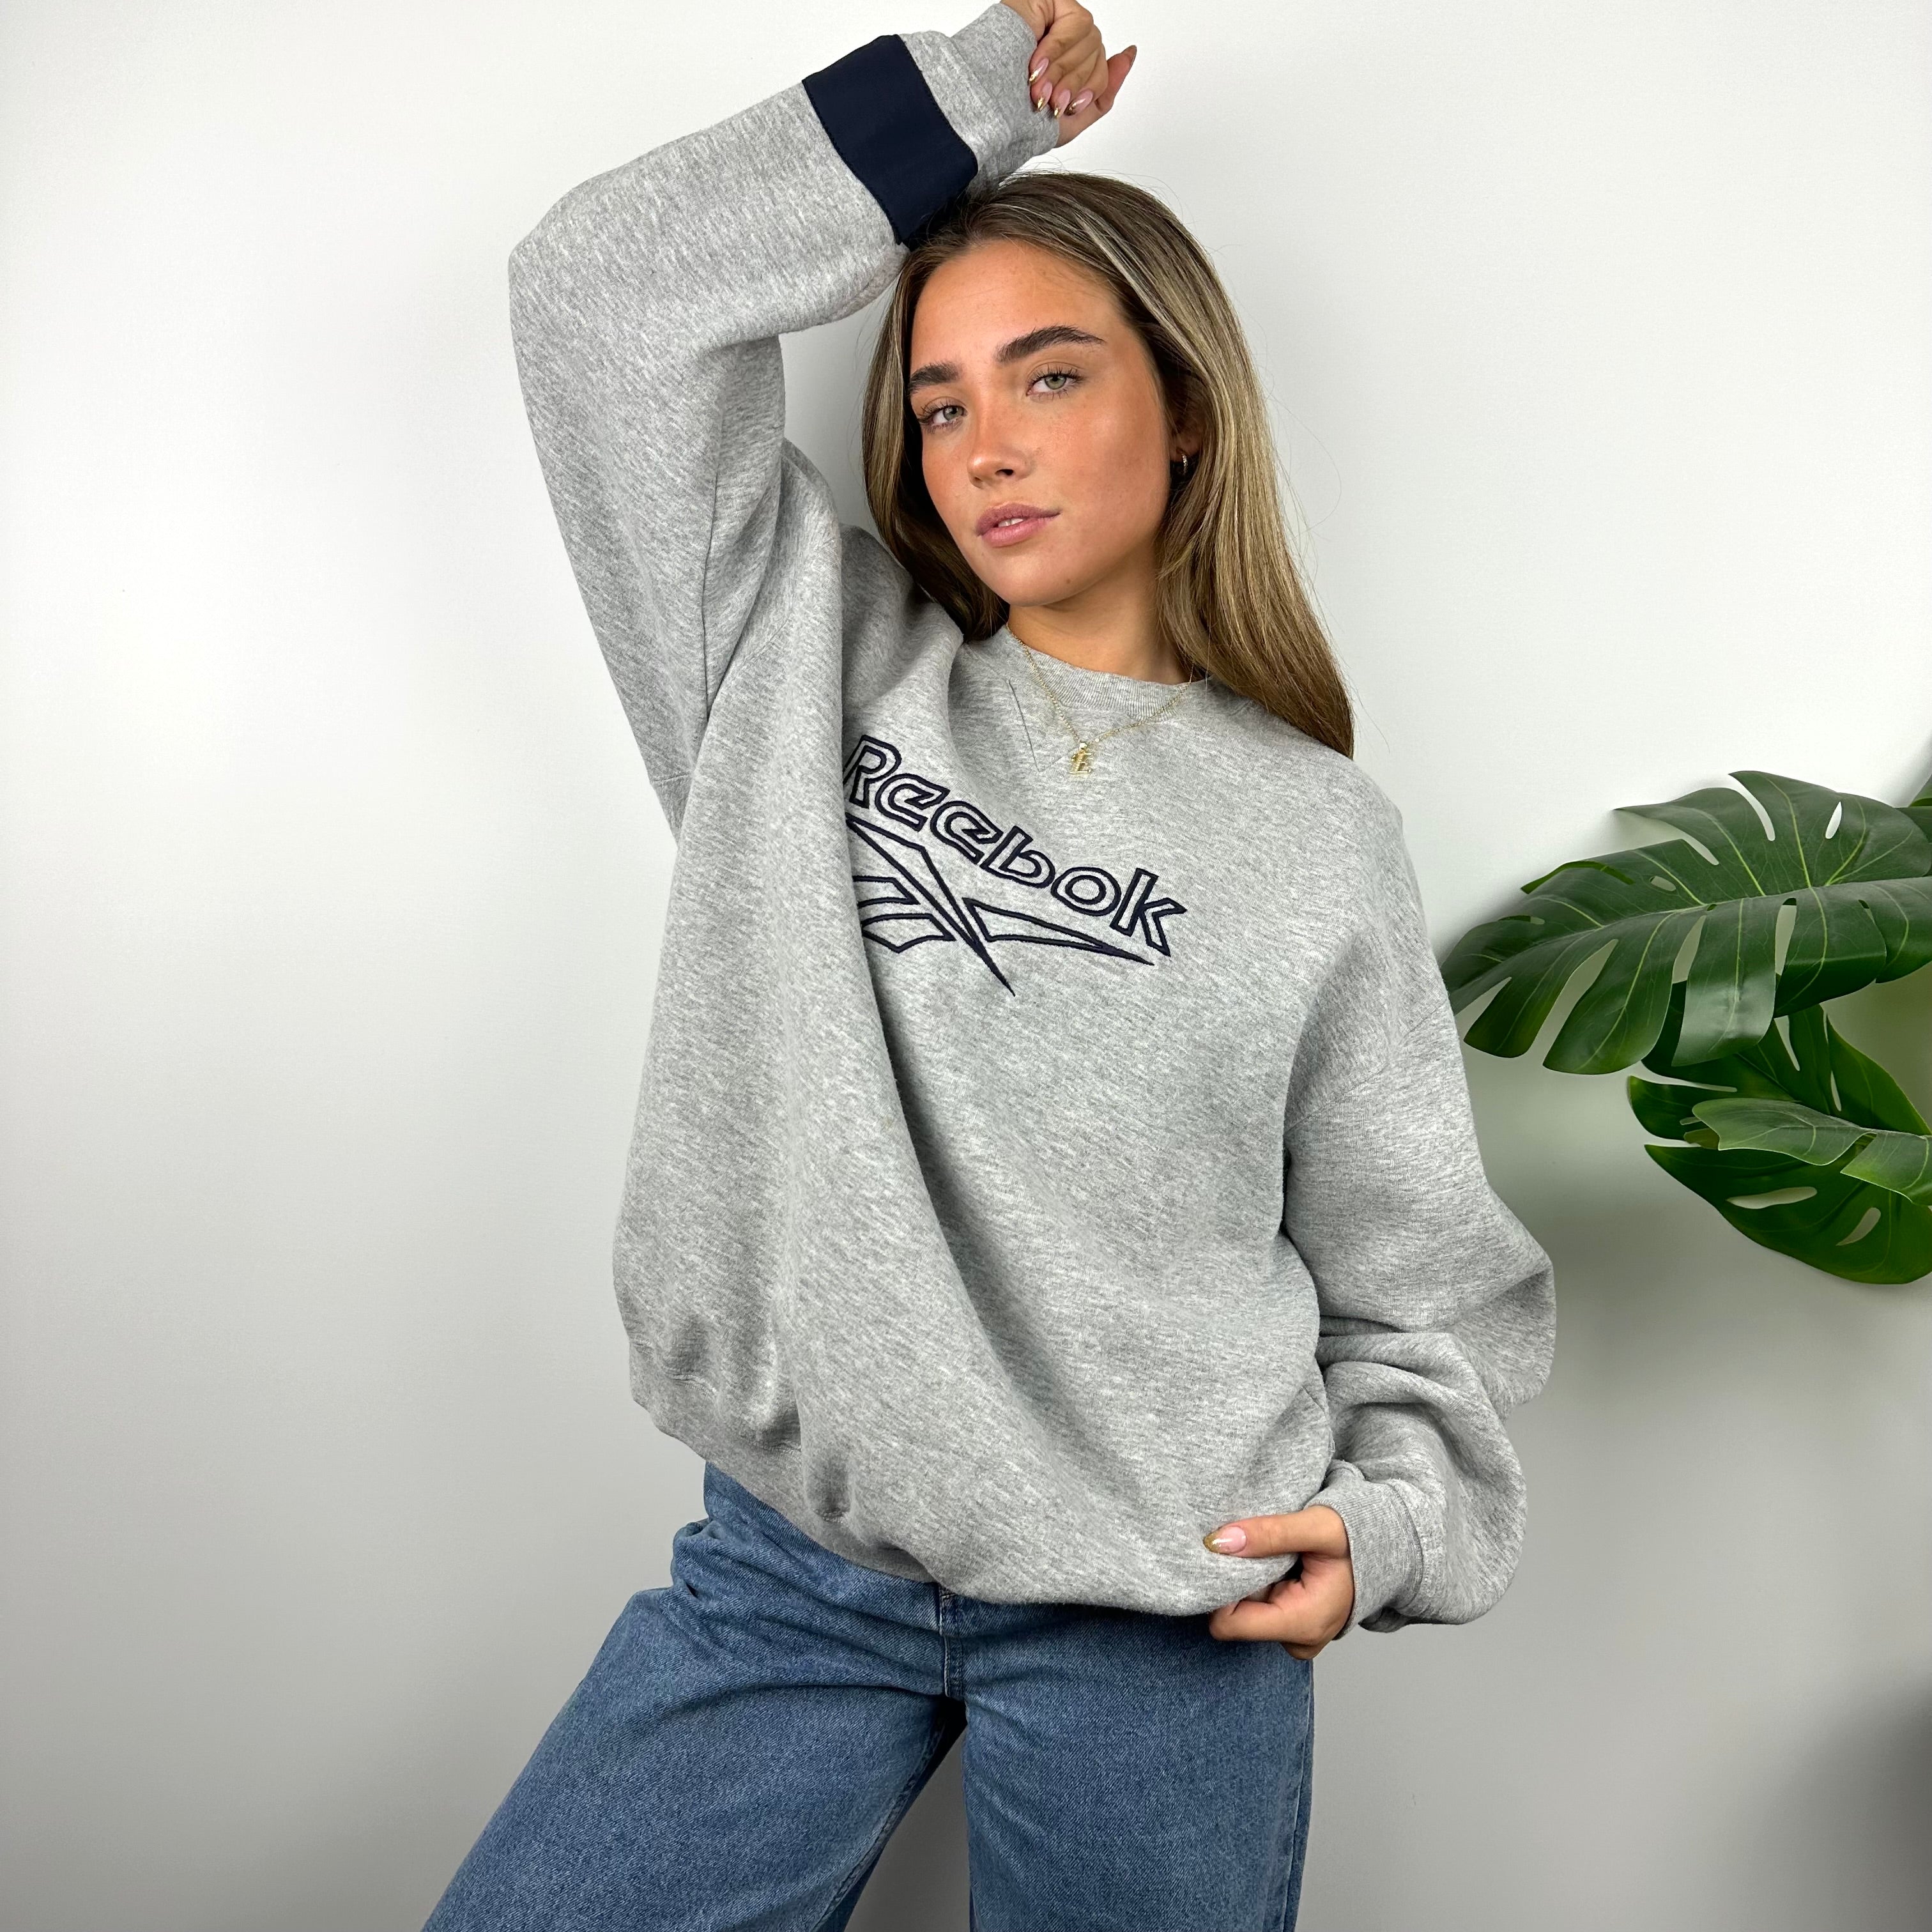 Reebok Grey Embroidered Spell Out Sweatshirt (L)